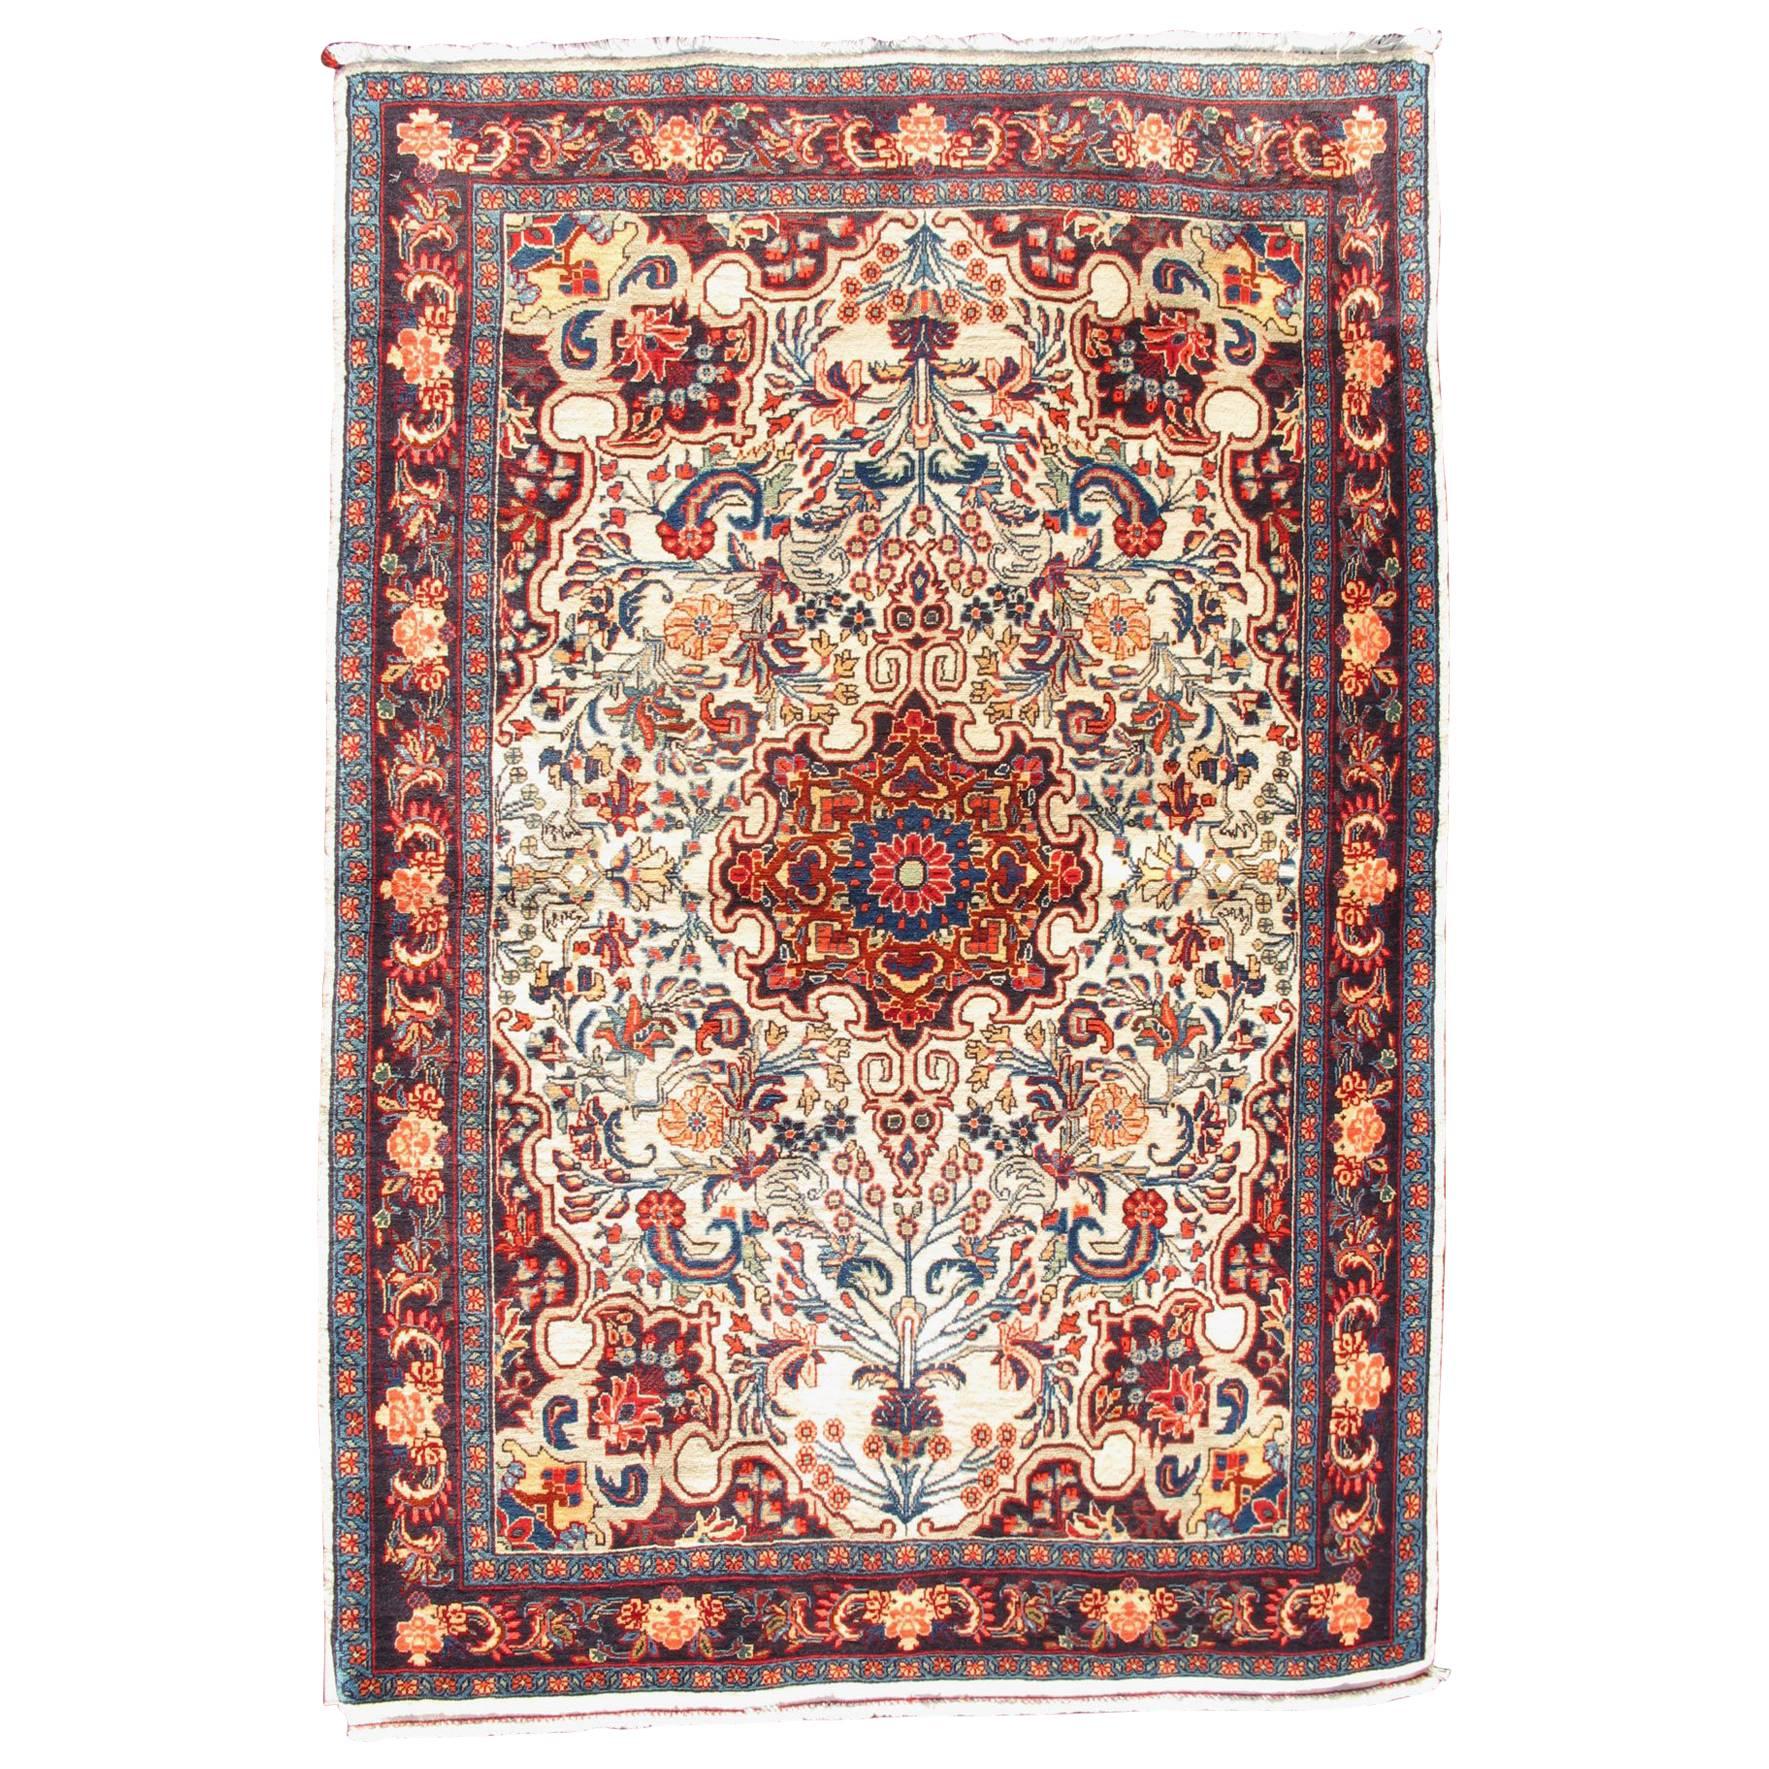 Persian Bidjar Vintage Small Rug in Ivory Background and Classic Design